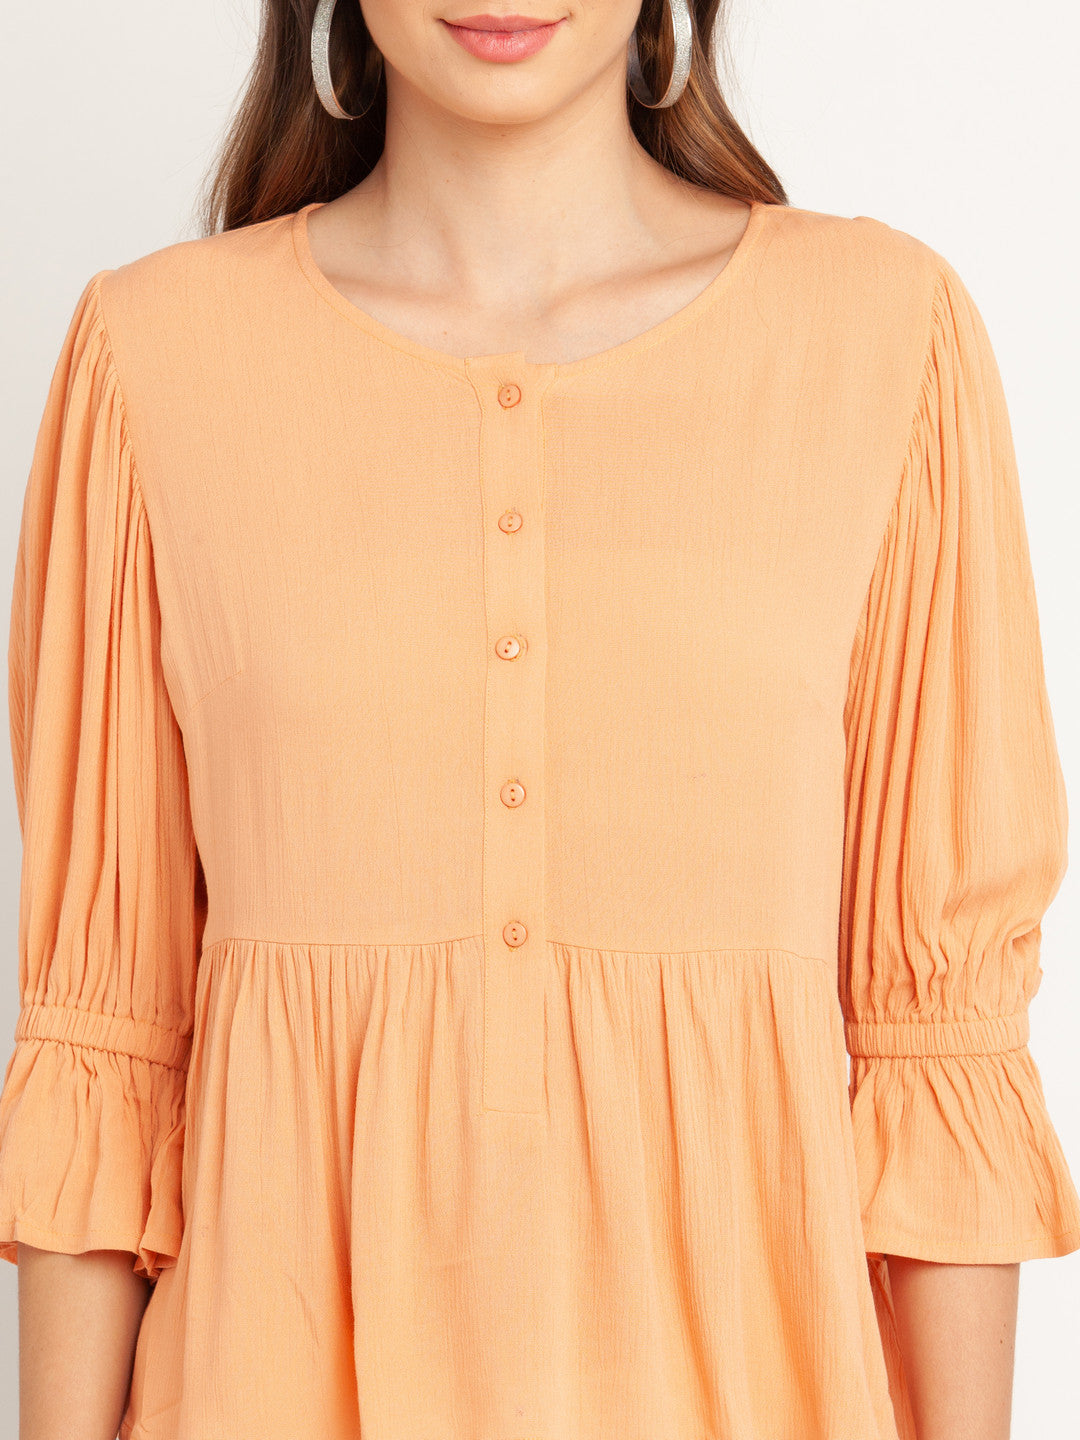 Orange Solid Gathered Top For Women